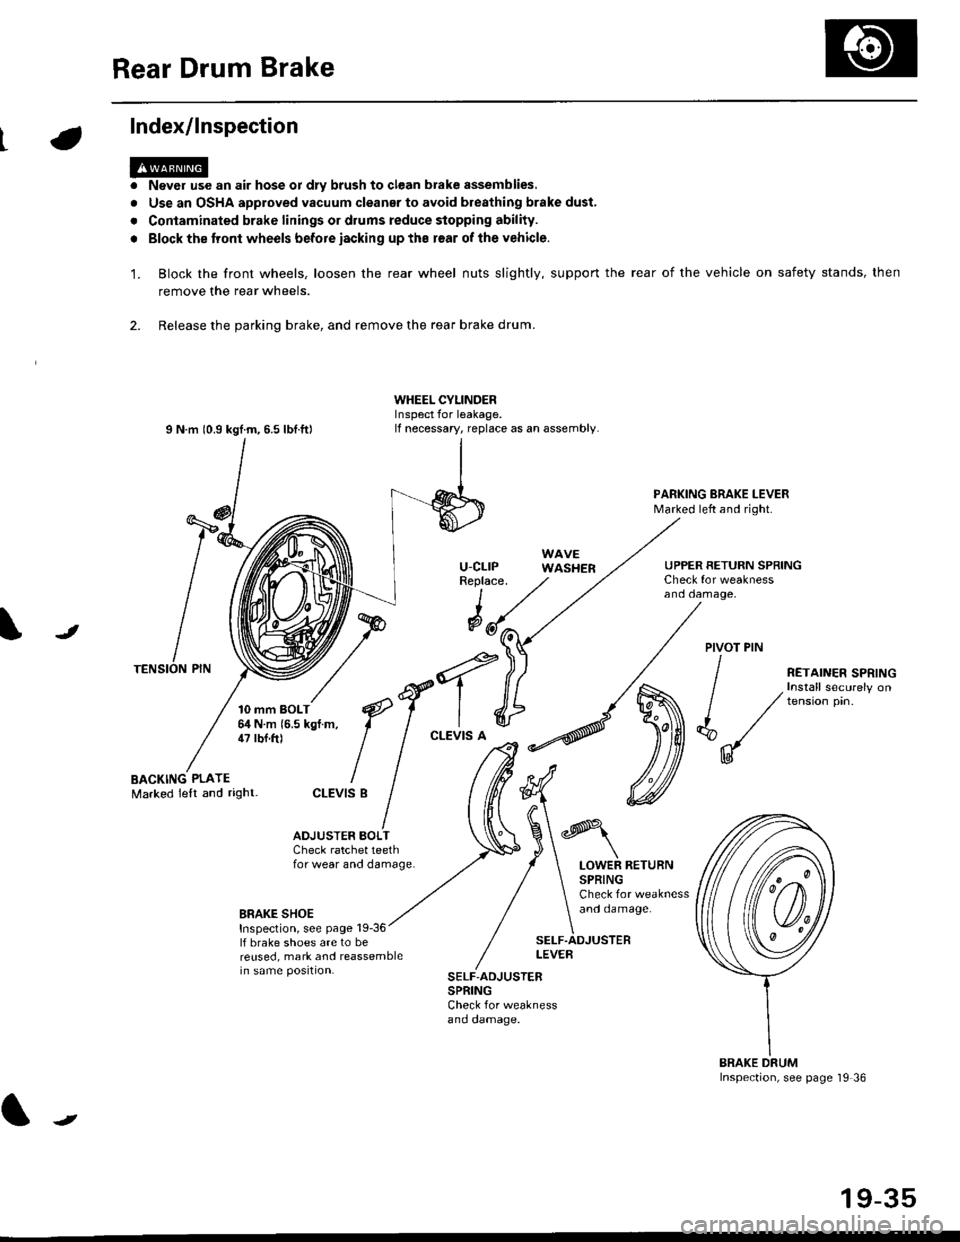 HONDA CIVIC 1996 6.G Service Manual Rear Drum Brake
Index/lnspection
1.
a
a
Never use an air hose or dly brush to clean brake assemblies,
Use an OSHA approved vacuum cleanar to avoid breathing brake dust,
Contaminated brake linings or 